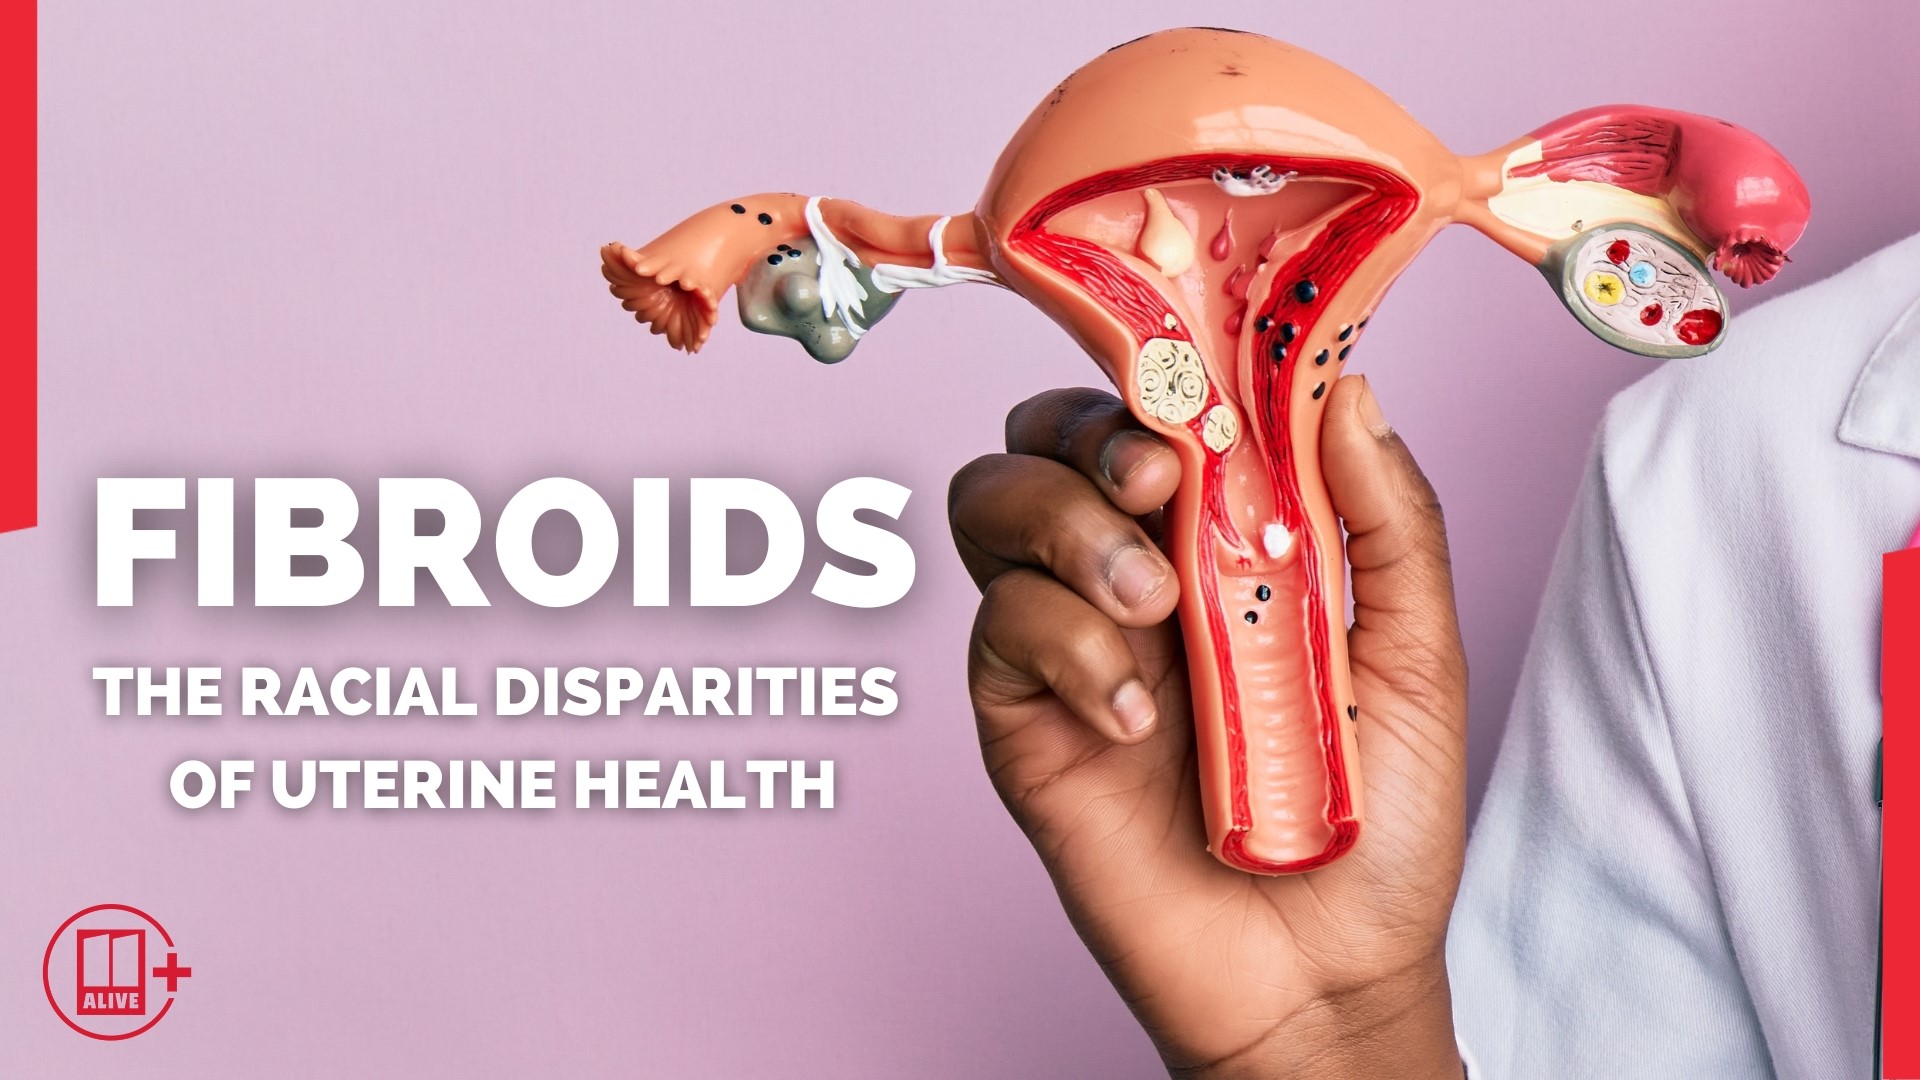 Fibroids are non-cancerous tumors that grow inside the uterus. Black women are 2-3 times more likely to suffer fibroids compared to white women.